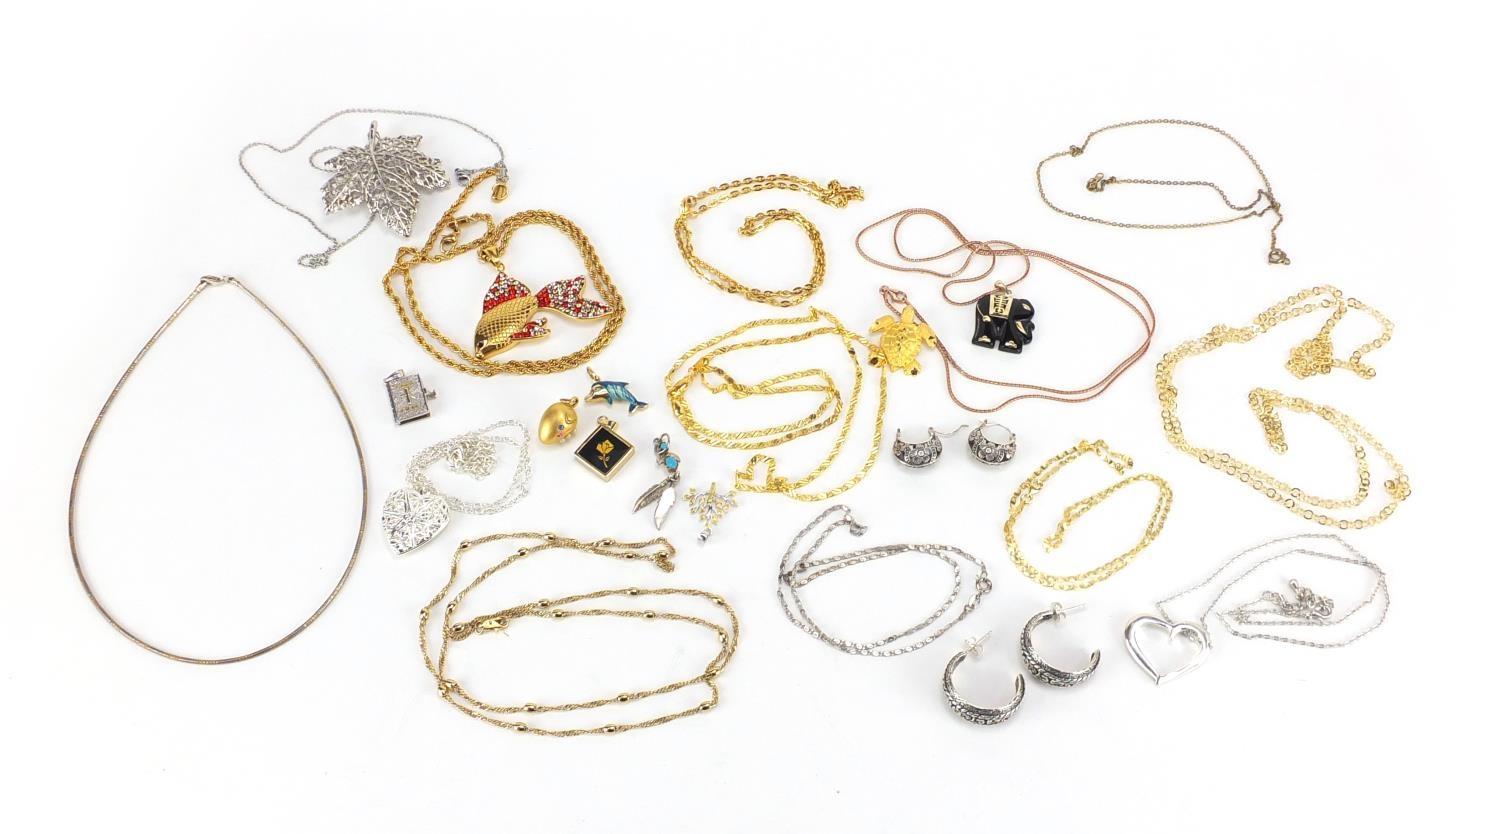 Costume jewellery including silver earrings, pendants and necklaces : For Further Condition